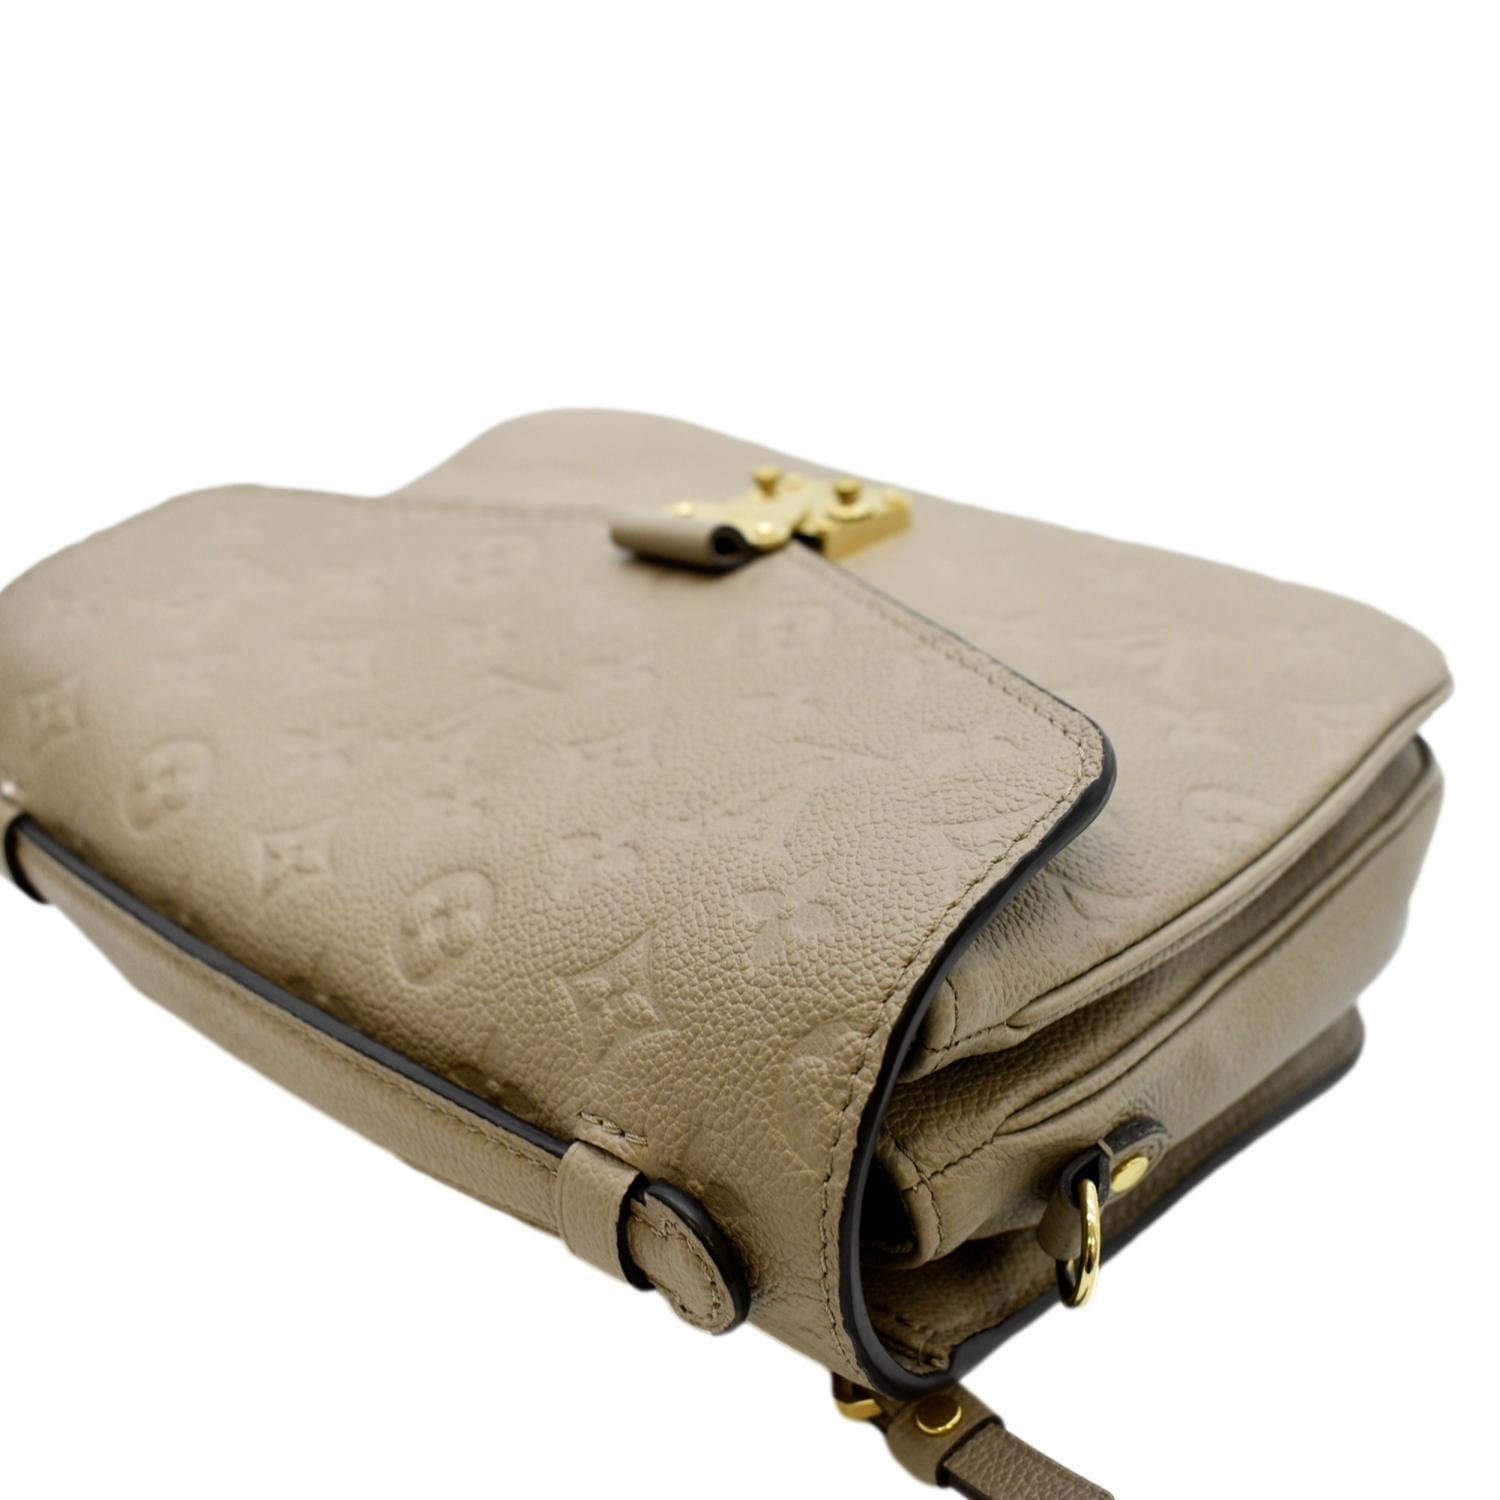 Metis leather crossbody bag Louis Vuitton Beige in Leather - 24013798